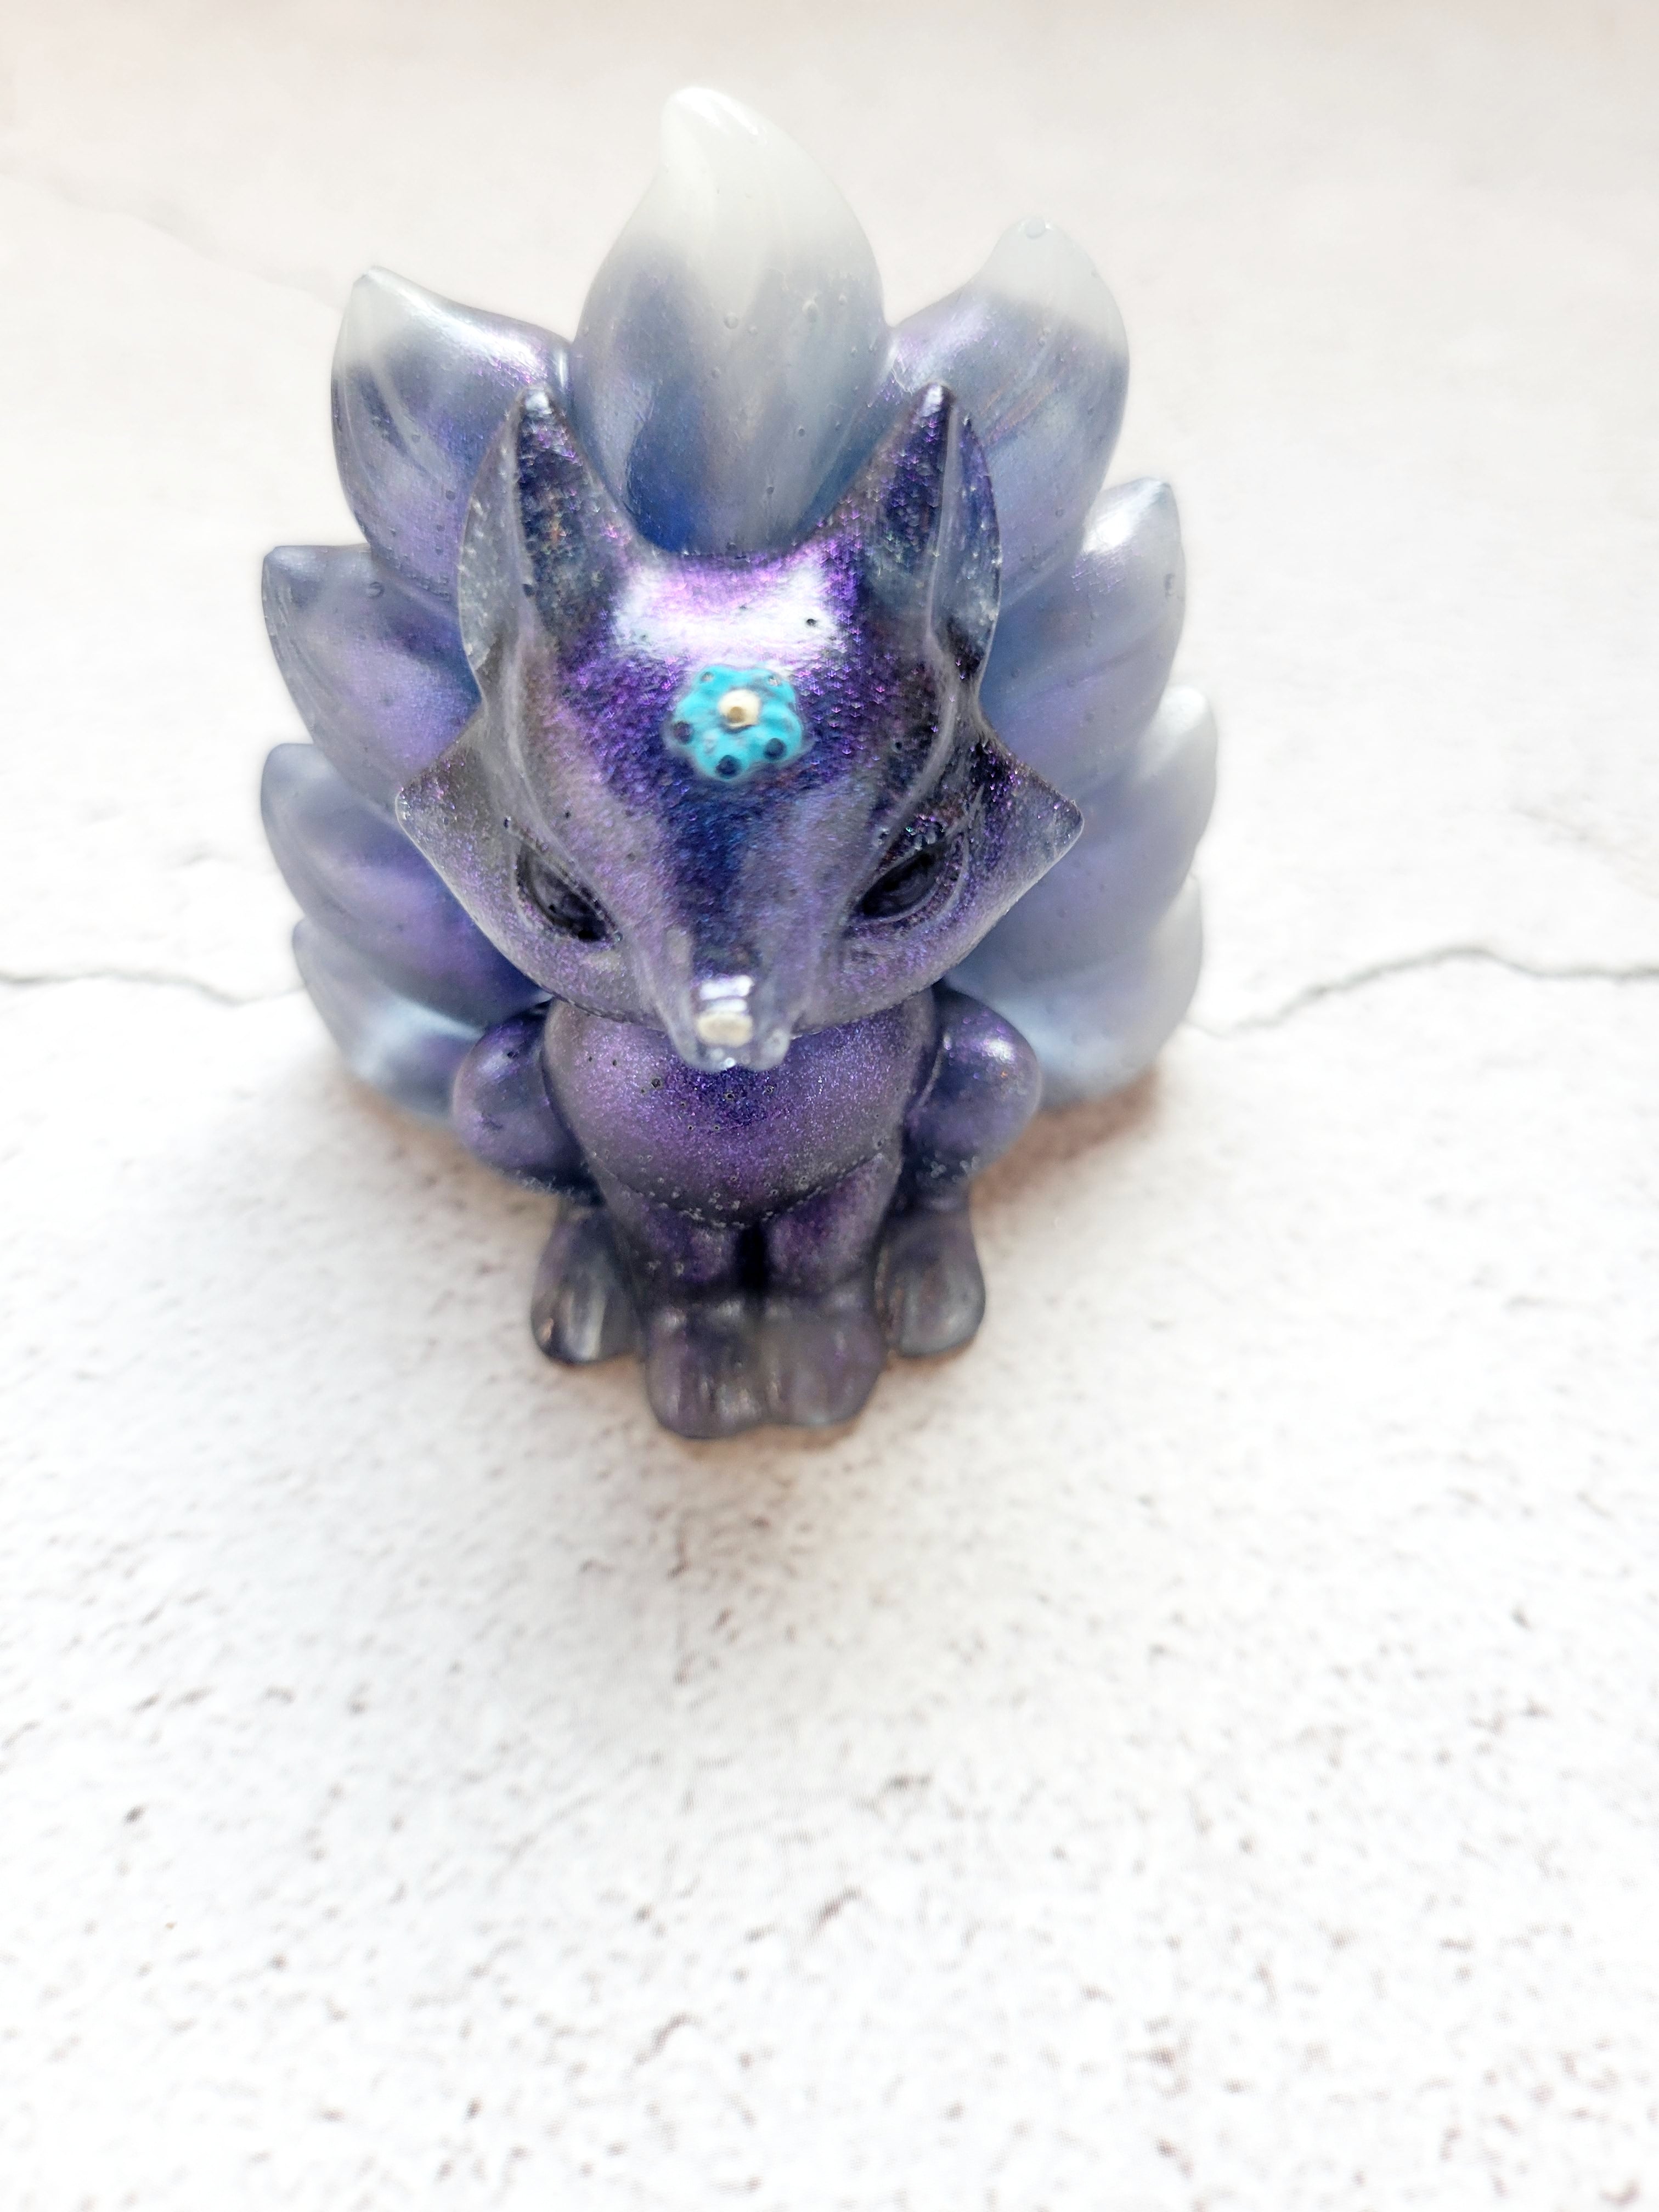 A front view of a kitsune fox figure with nine tails. It's body is deep blue with a blue and white swirled tail. It has black eyes, white nose, and light blue flower on its head.